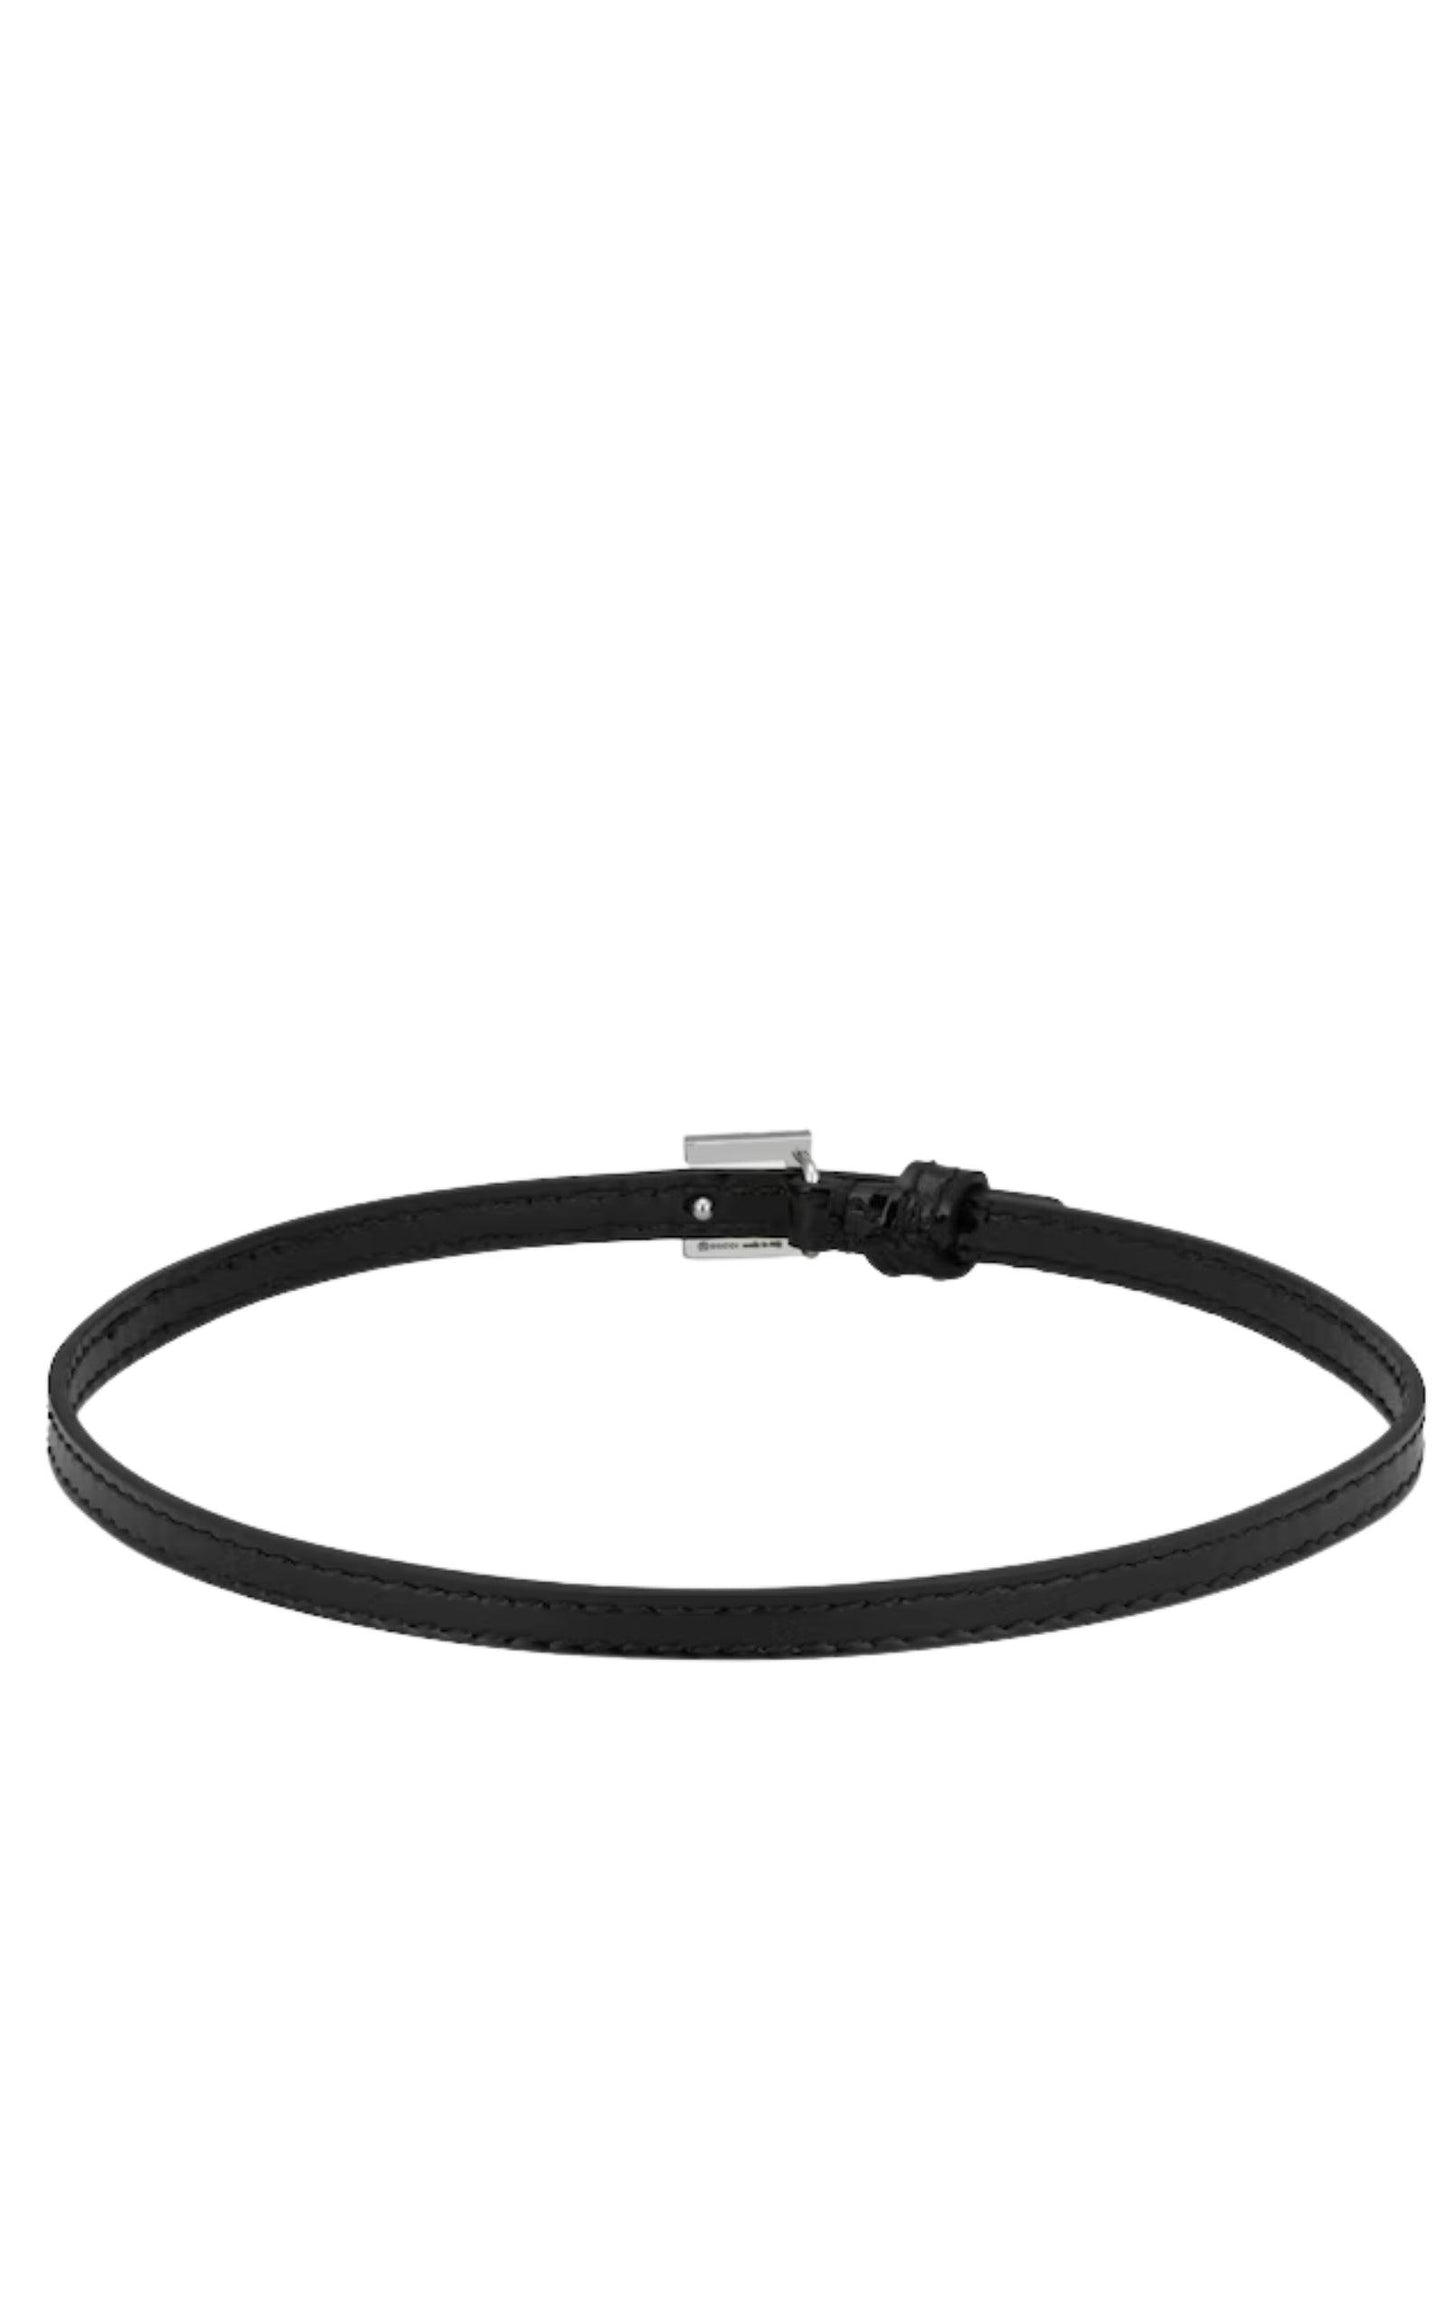  GucciLeather Choker with Square GG - Runway Catalog